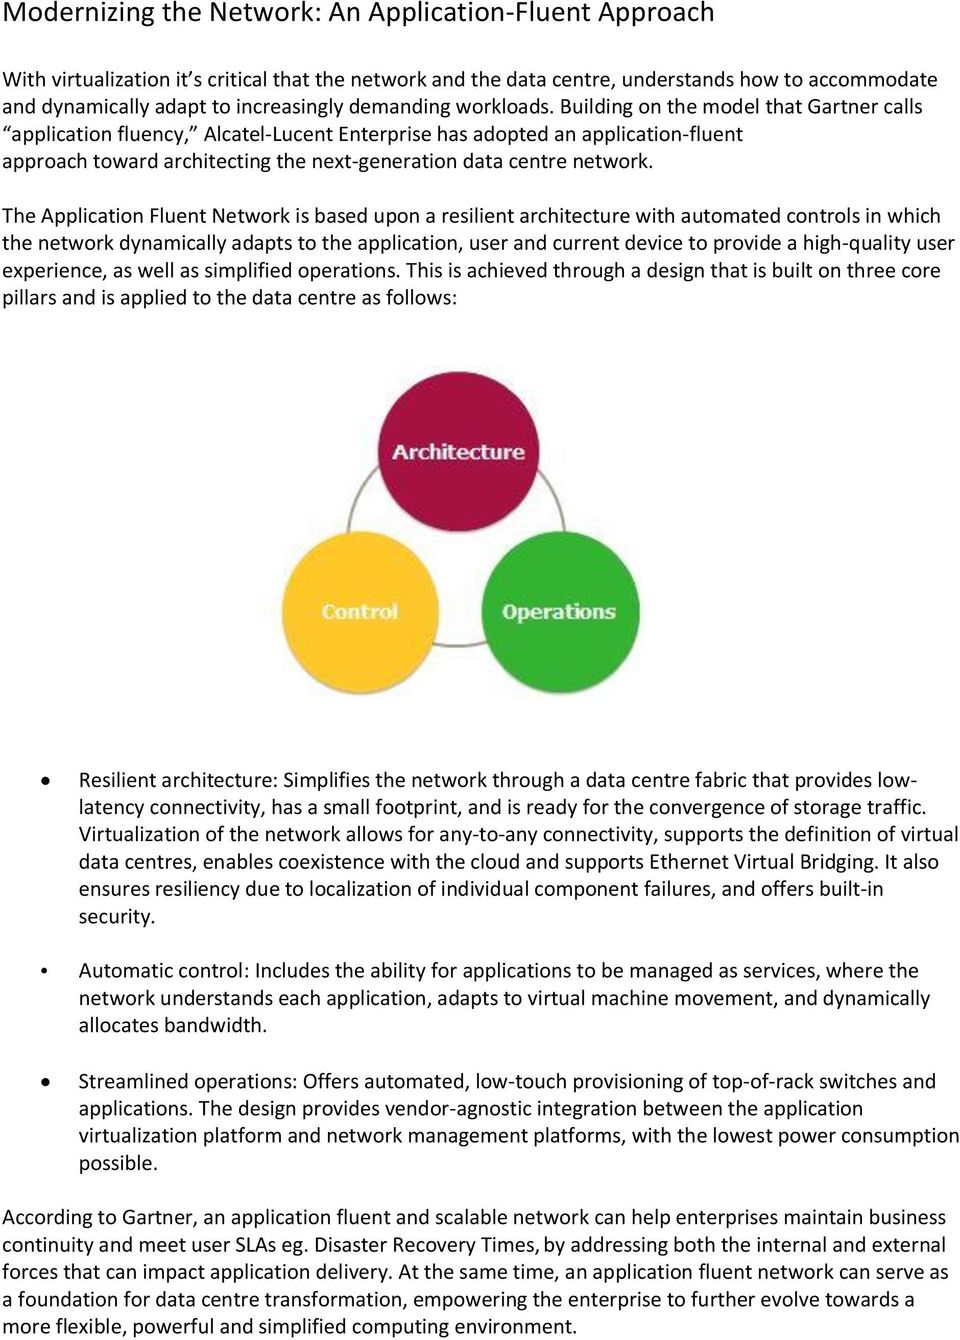 Building on the model that Gartner calls application fluency, Alcatel-Lucent Enterprise has adopted an application-fluent approach toward architecting the next-generation data centre network.